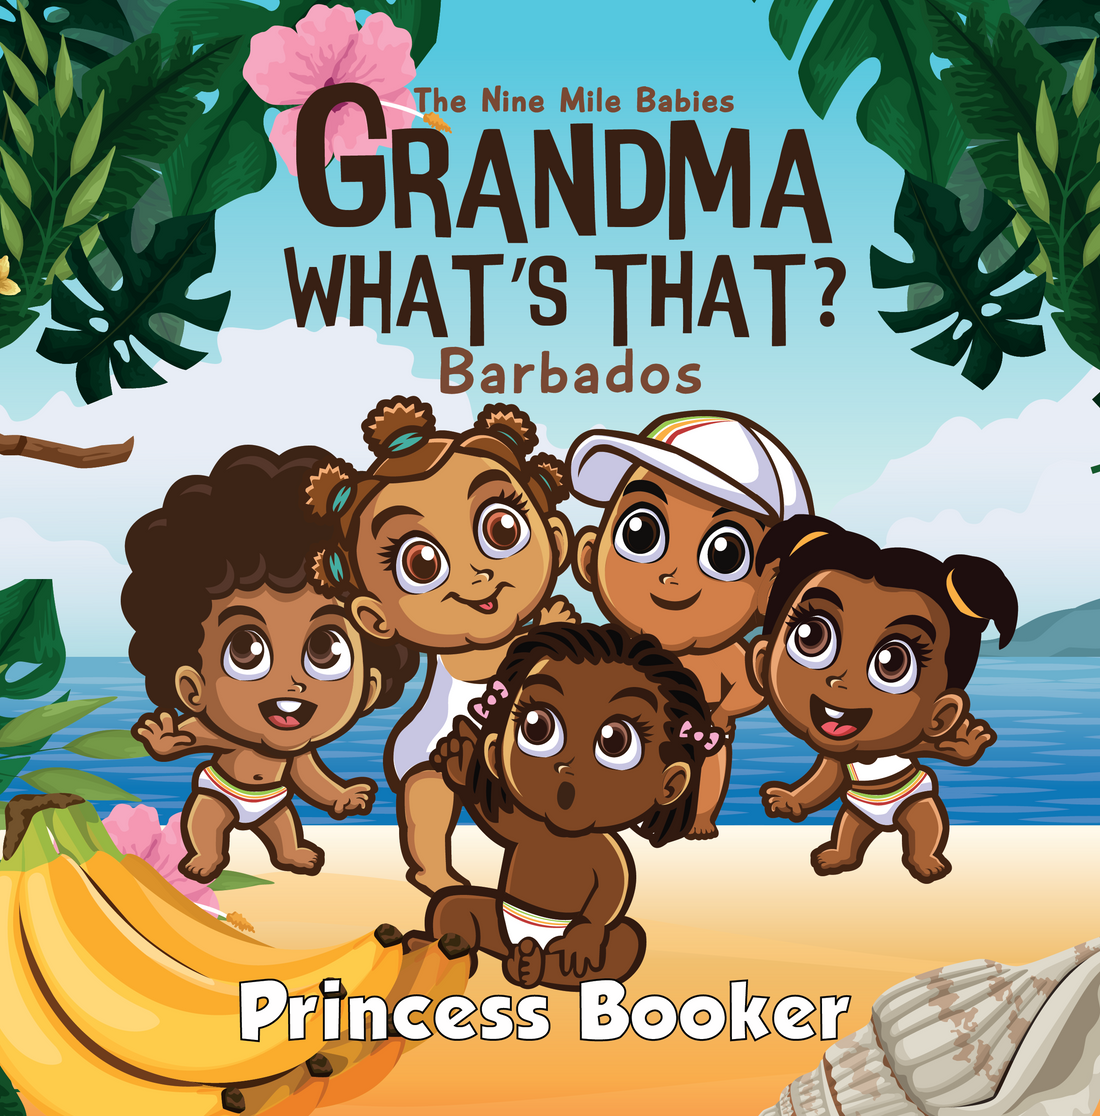 Princess Booker Expands Literary Adventure with the Release of "Grandma What's That? Barbados," Adding Diversity to Children's Picture Books